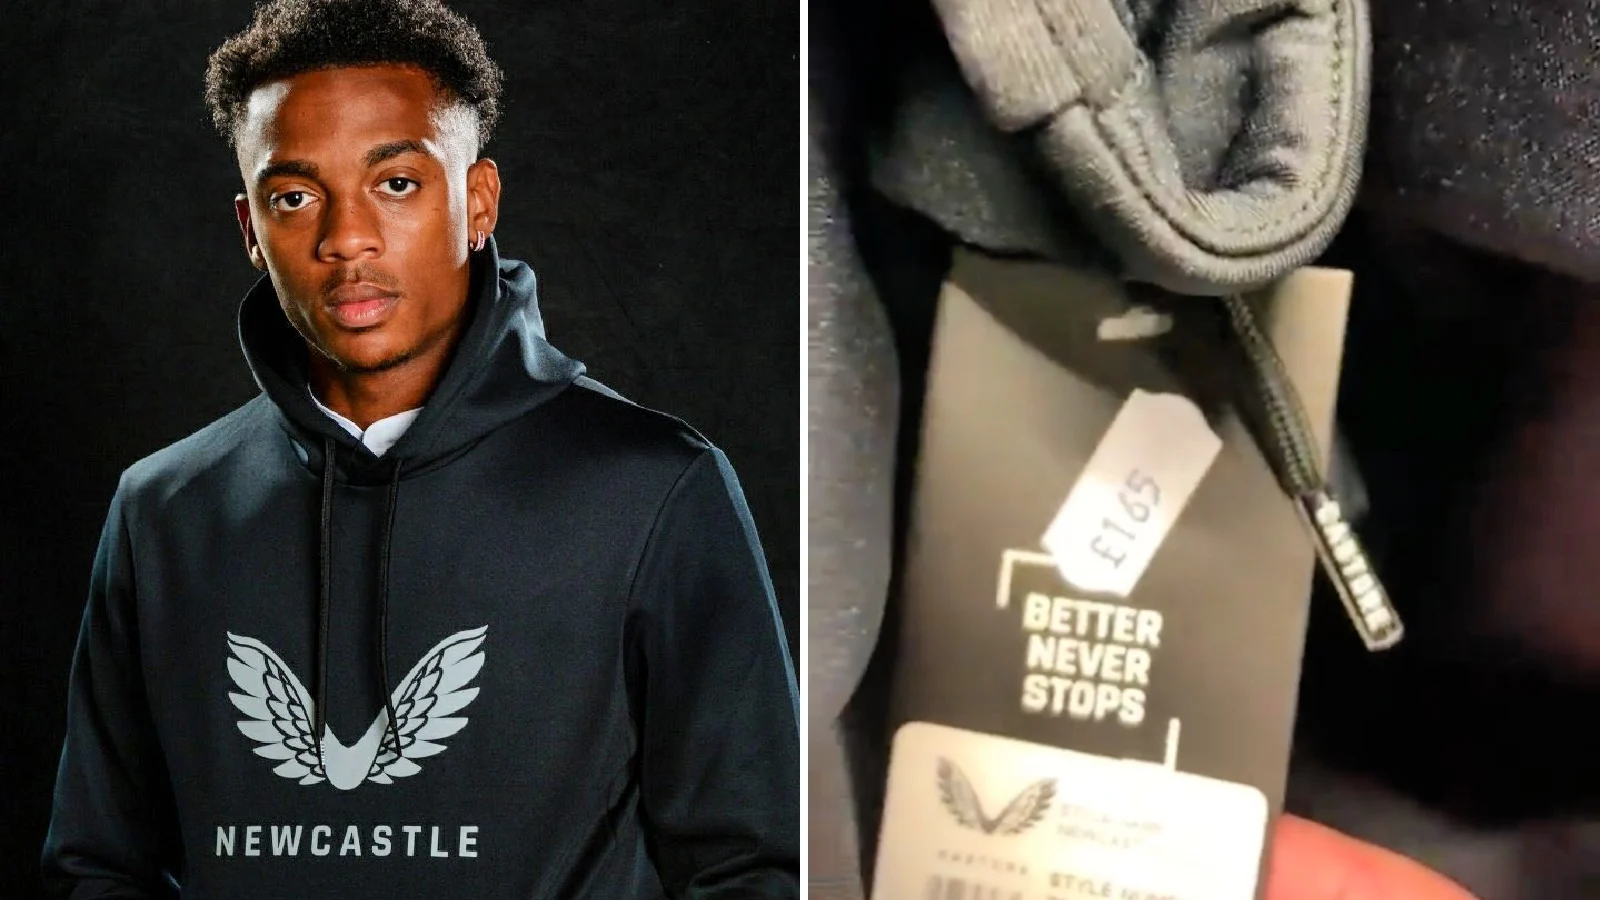 Garcia hoodie priced at £165 as Newcastle United new signing Joe Willock models the new merchandise from Castore